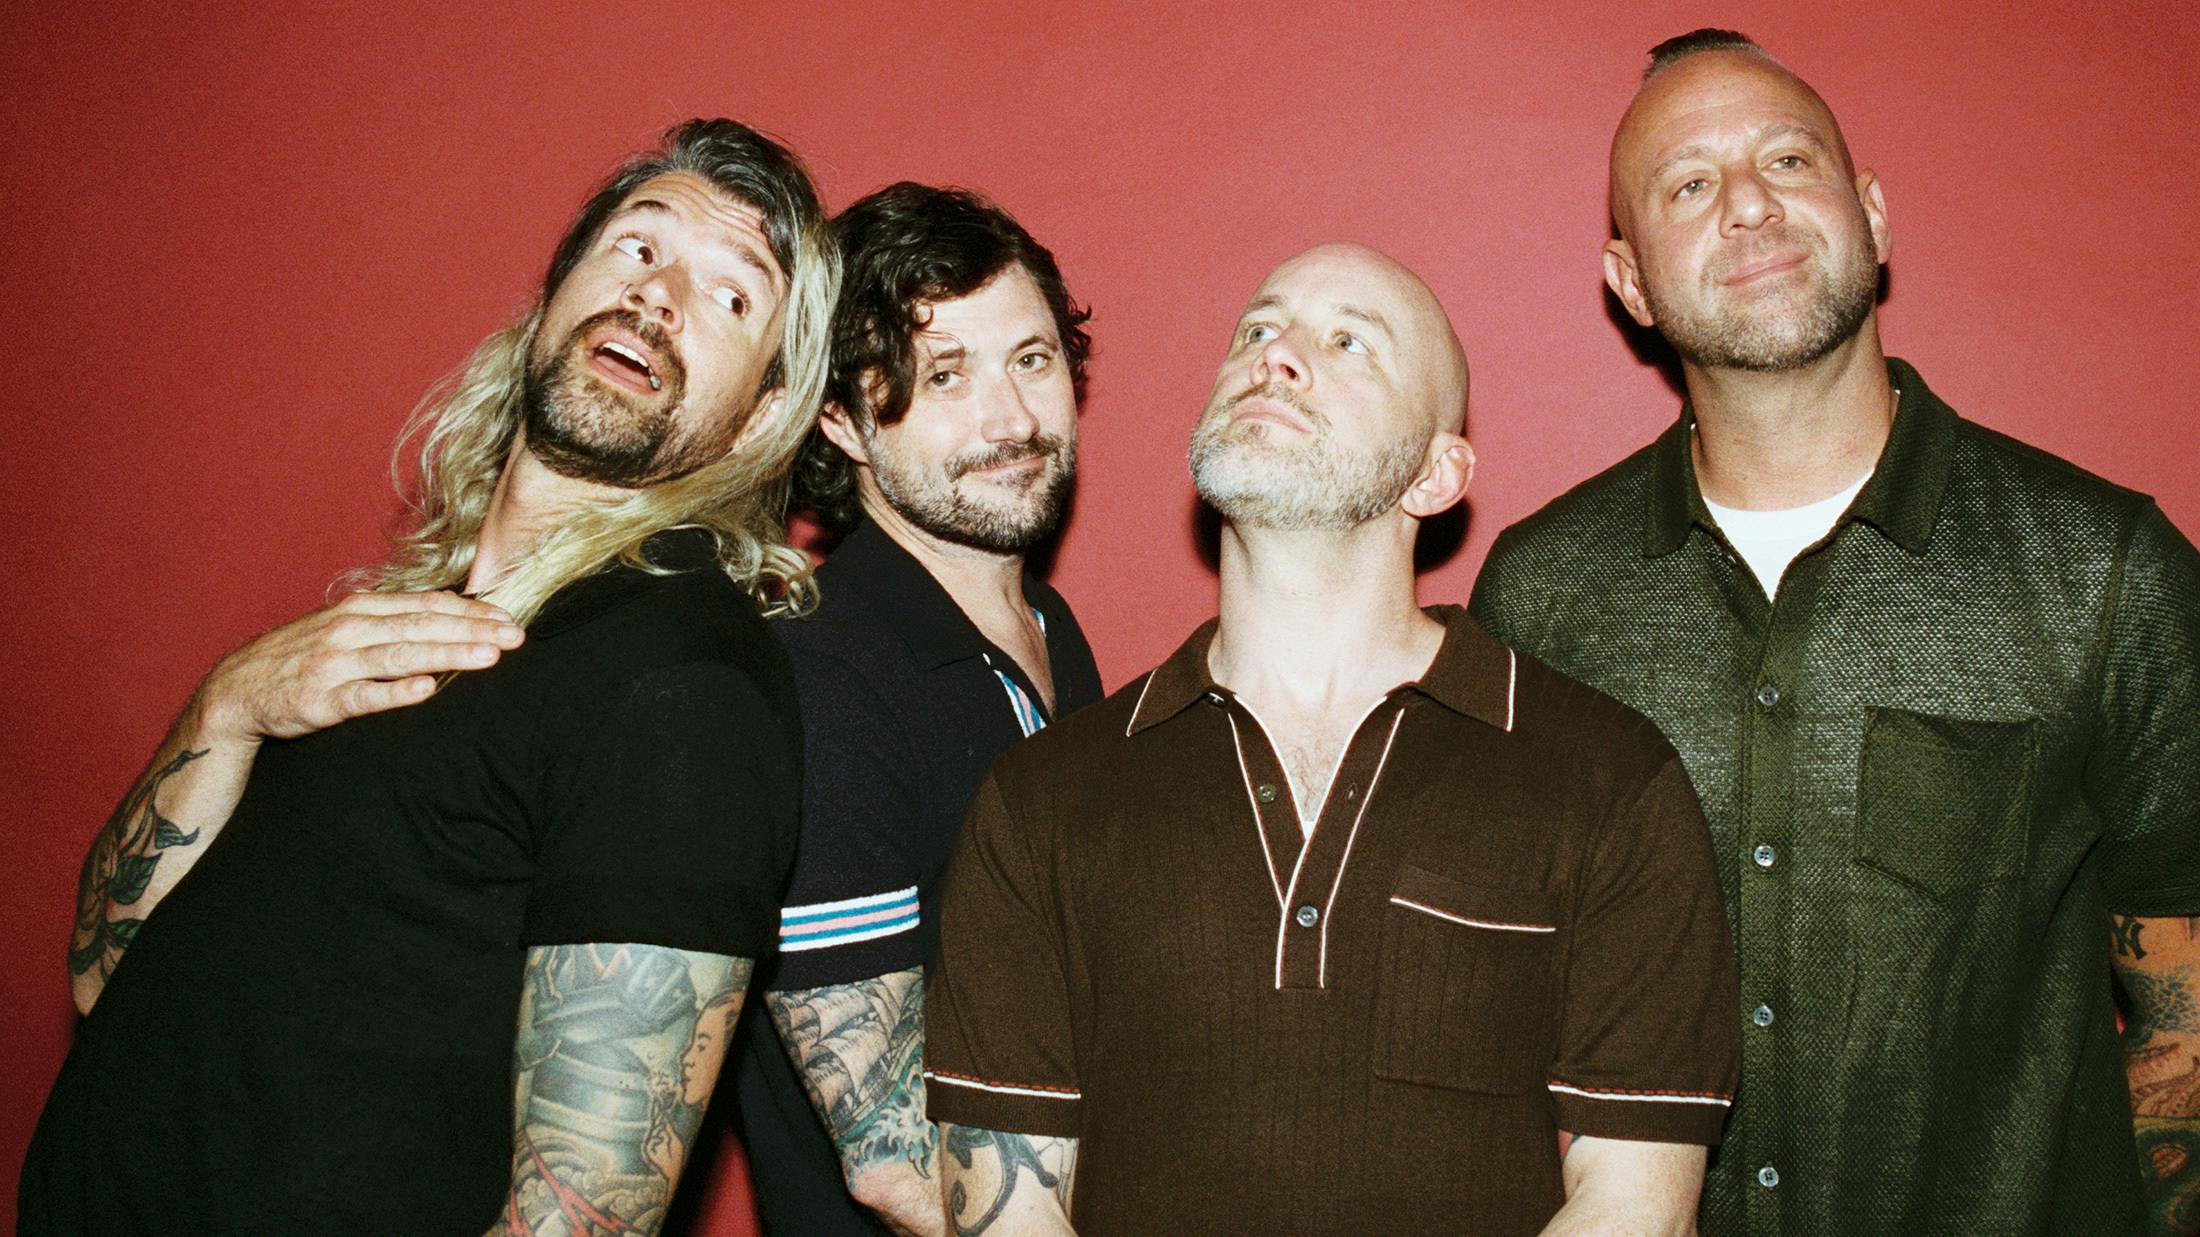 Taking Back Sunday: “With each record we’ve been able to see that we’re not alone”